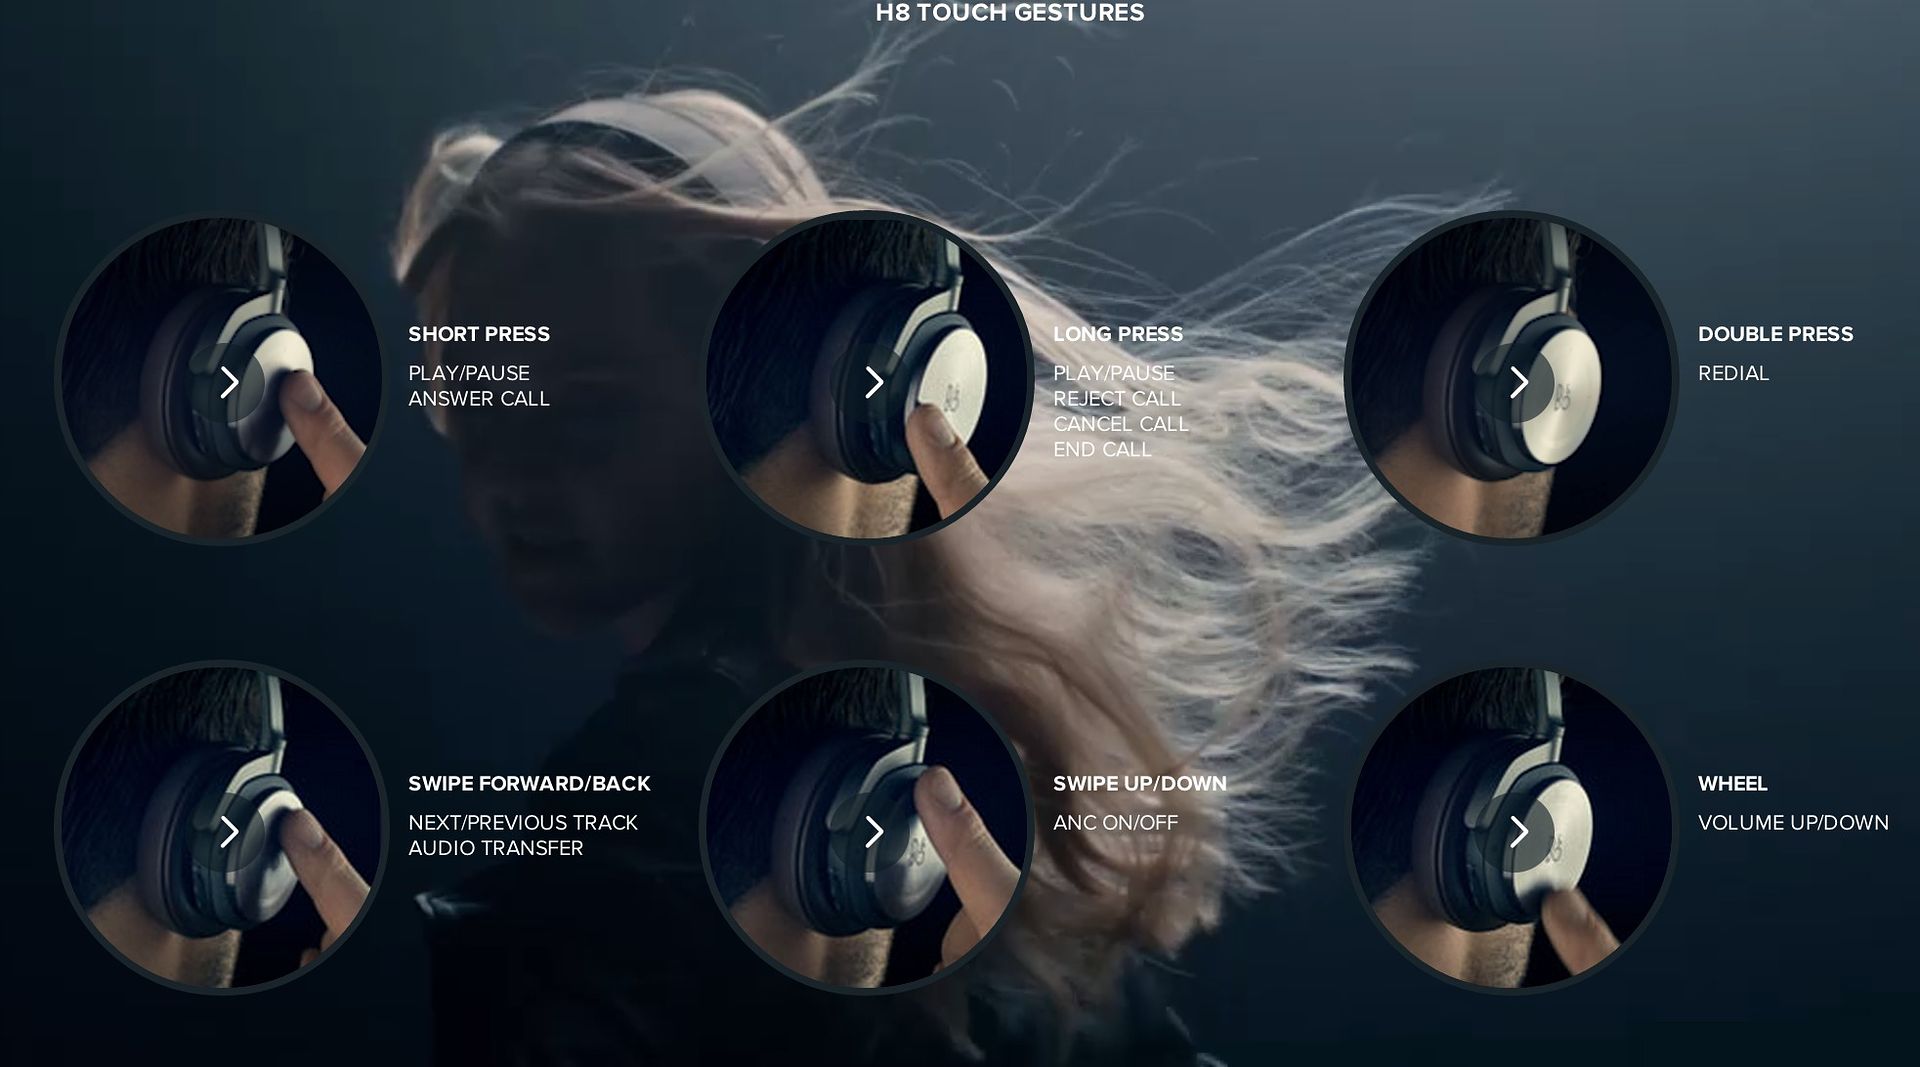 BeoPlay H8 headphones: Easy touch gestures control volume, noise-cancelling and more